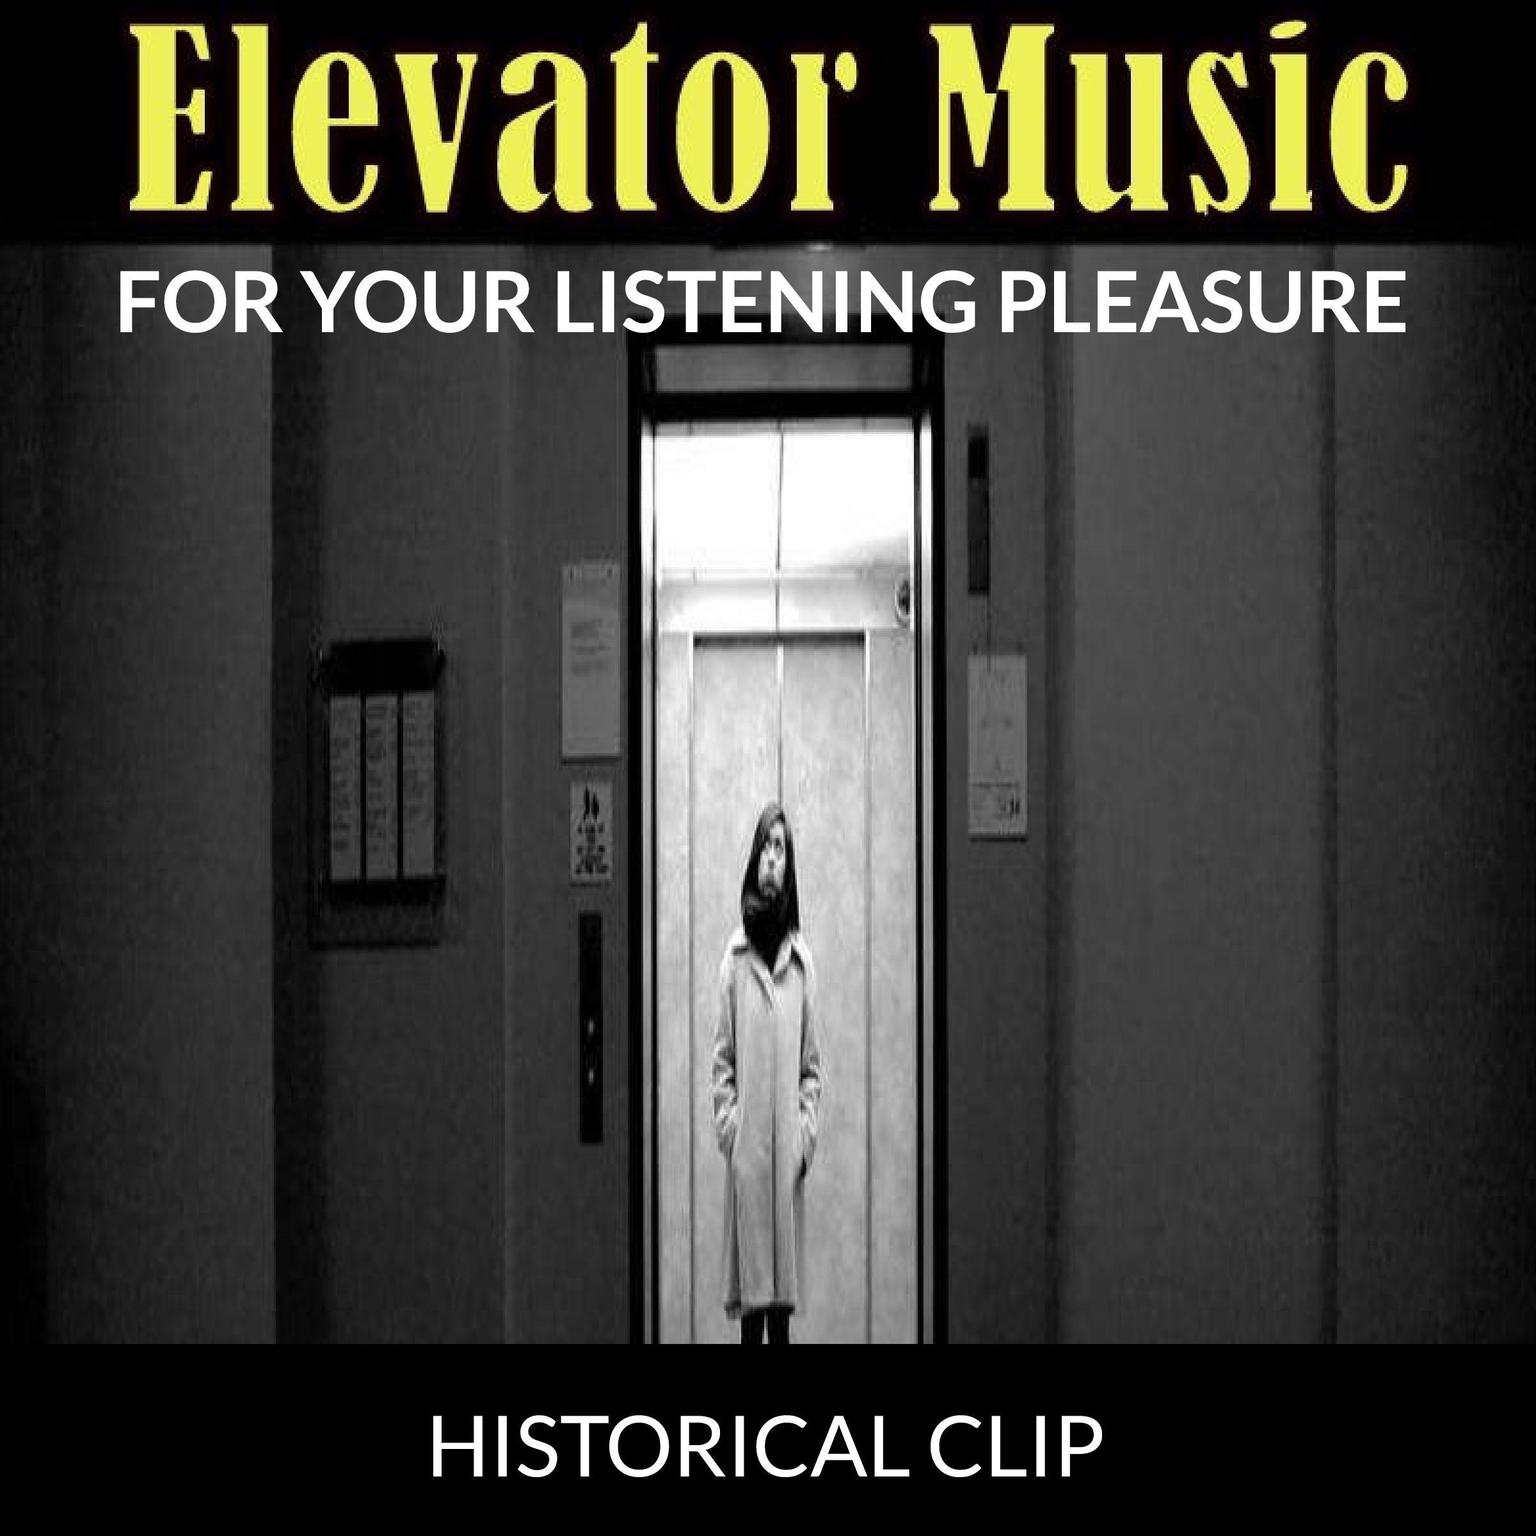 Elevator Music: For Your Listening Pleasure Audiobook, by Historical Clip